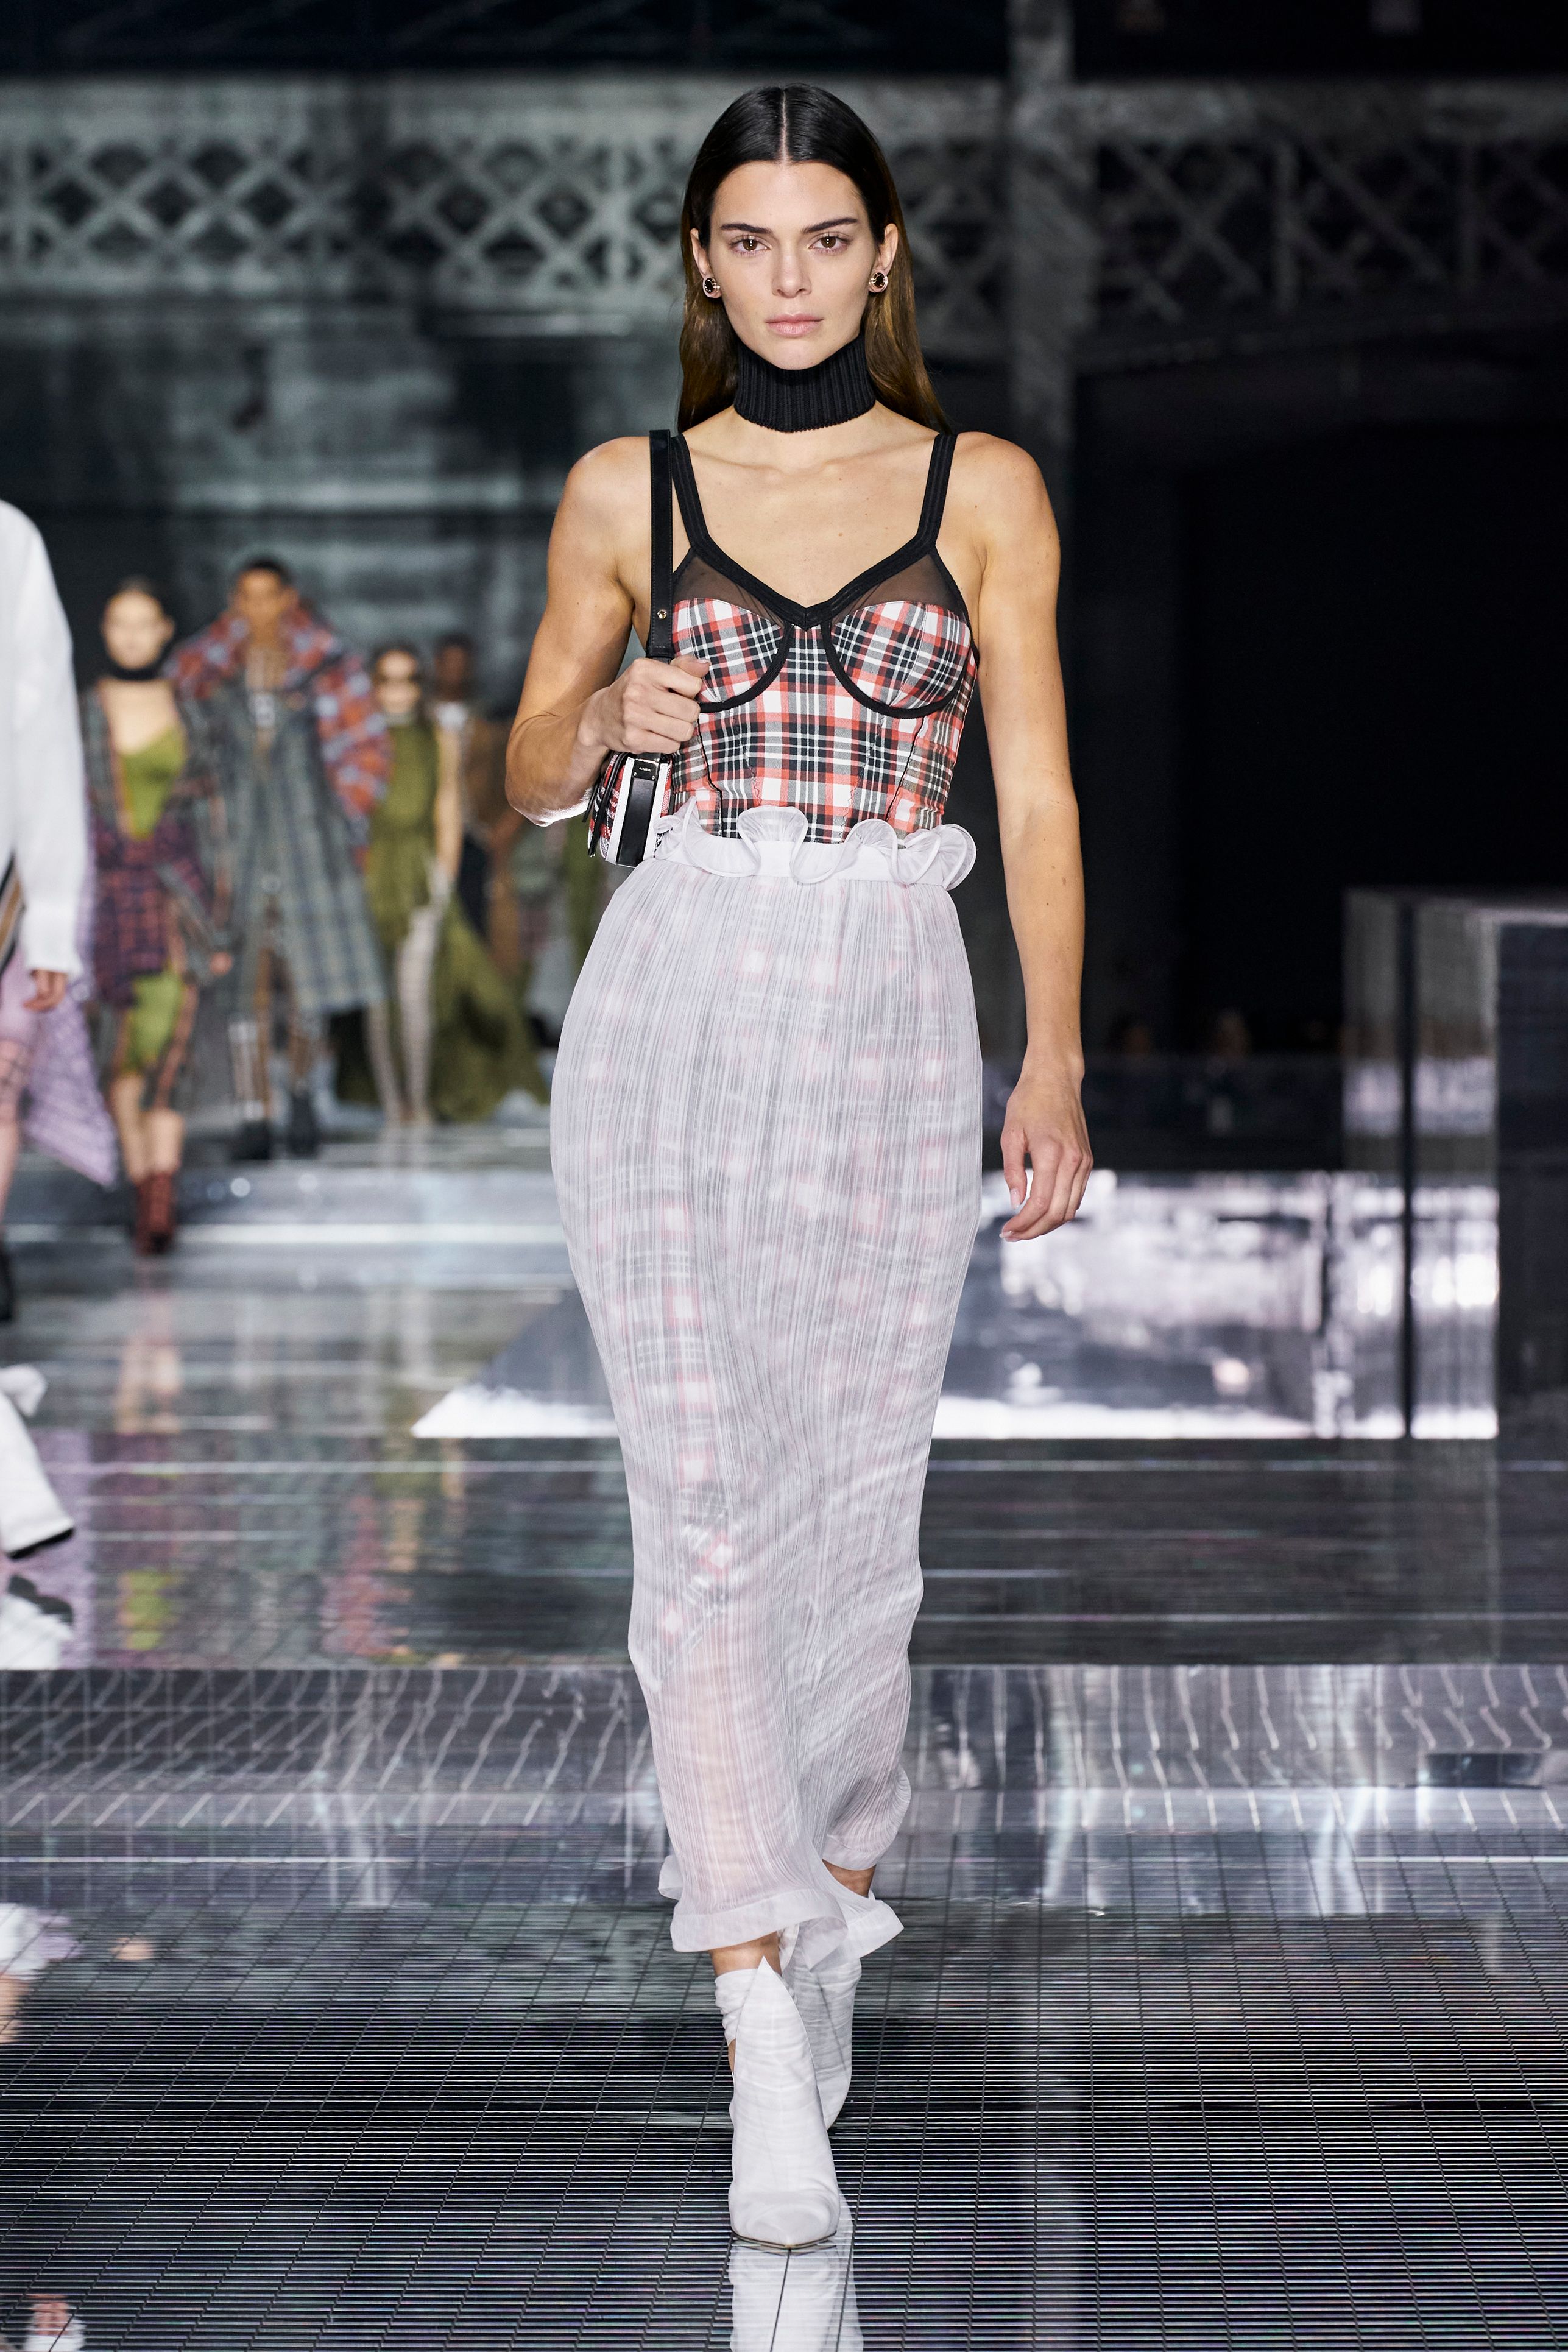 Kendall Jenner's Best Runway Looks: Photos of the Model